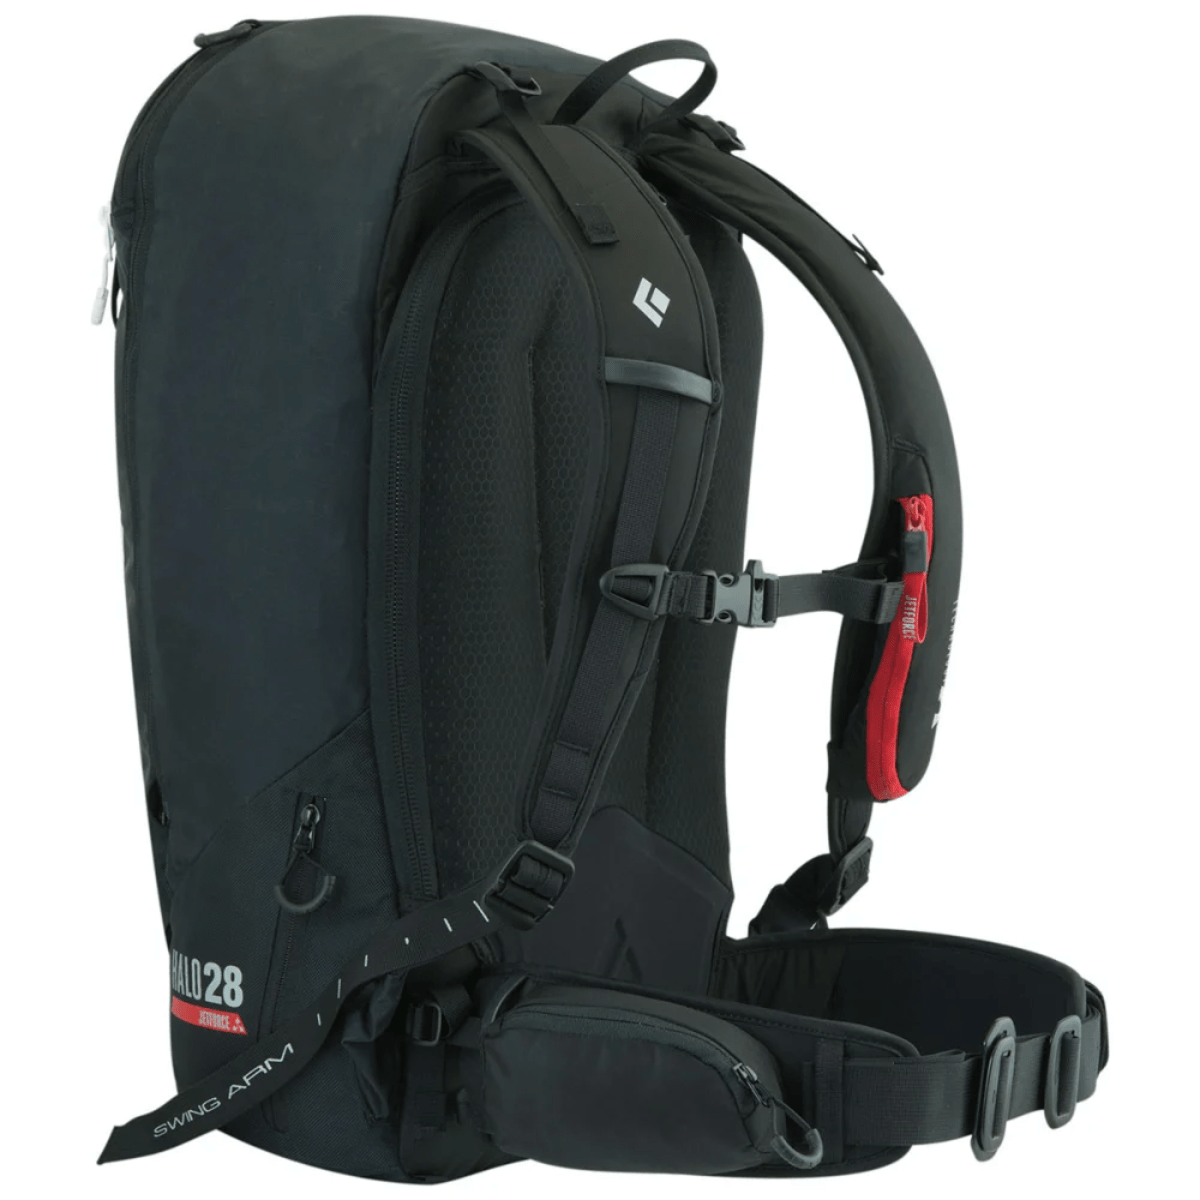 Black Diamond Halo 28 JetForce Airbag Pack - Al's Sporting Goods: Your  One-Stop Shop for Outdoor Sports Gear & Apparel